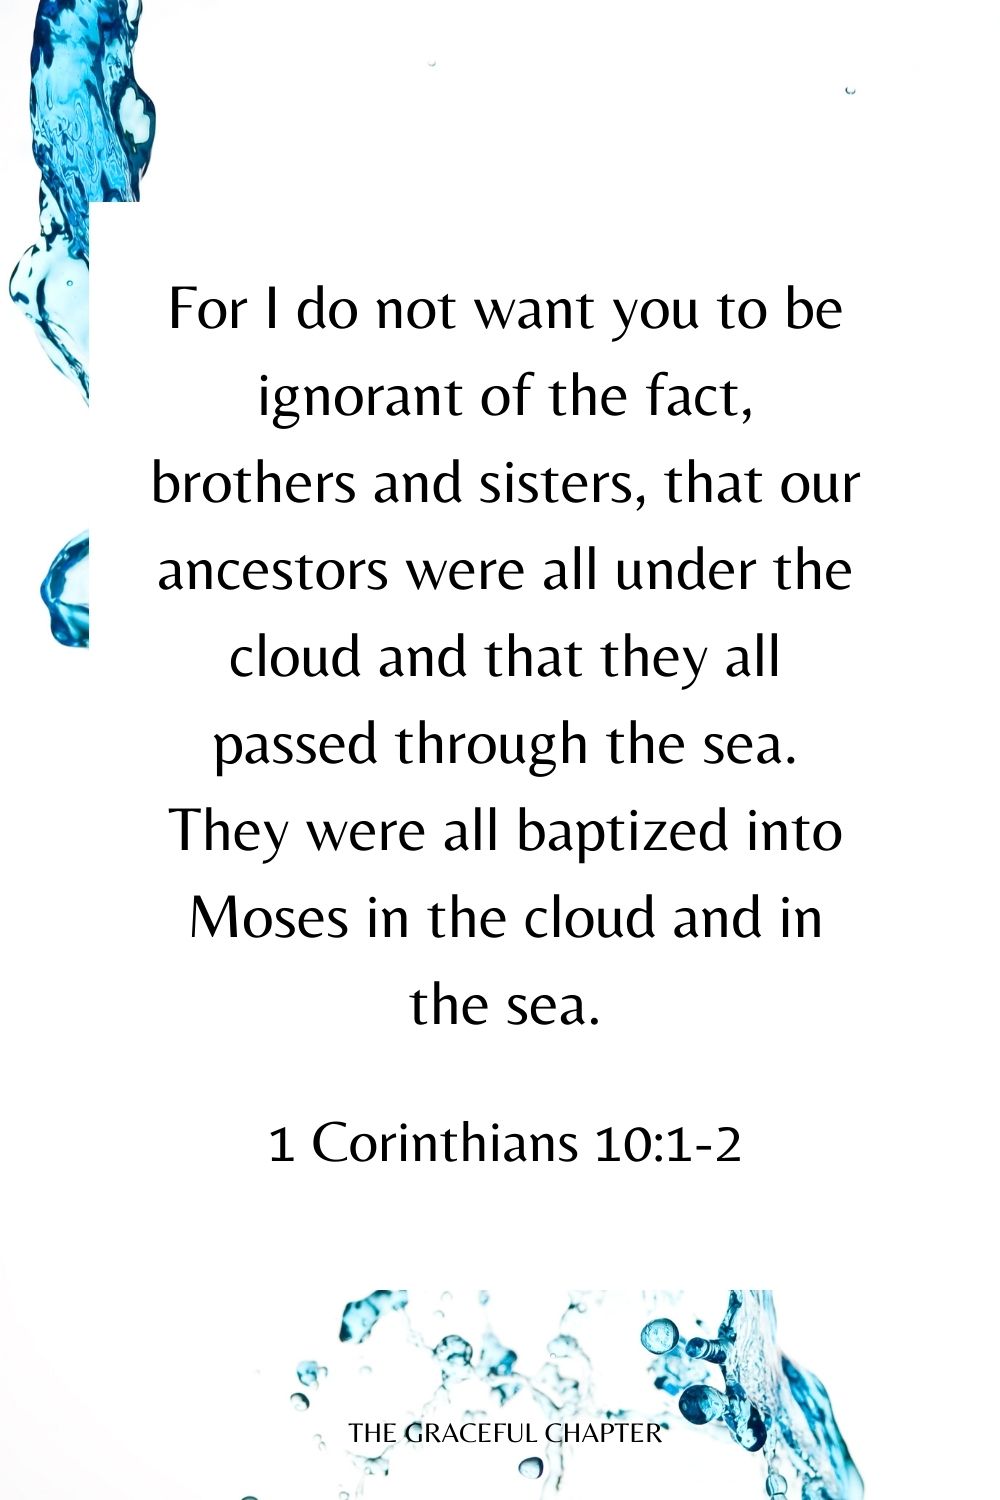 For I do not want you to be ignorant of the fact, brothers and sisters, that our ancestors were all under the cloud and that they all passed through the sea. They were all baptized into Moses in the cloud and in the sea. 1 Corinthians 10:1-2